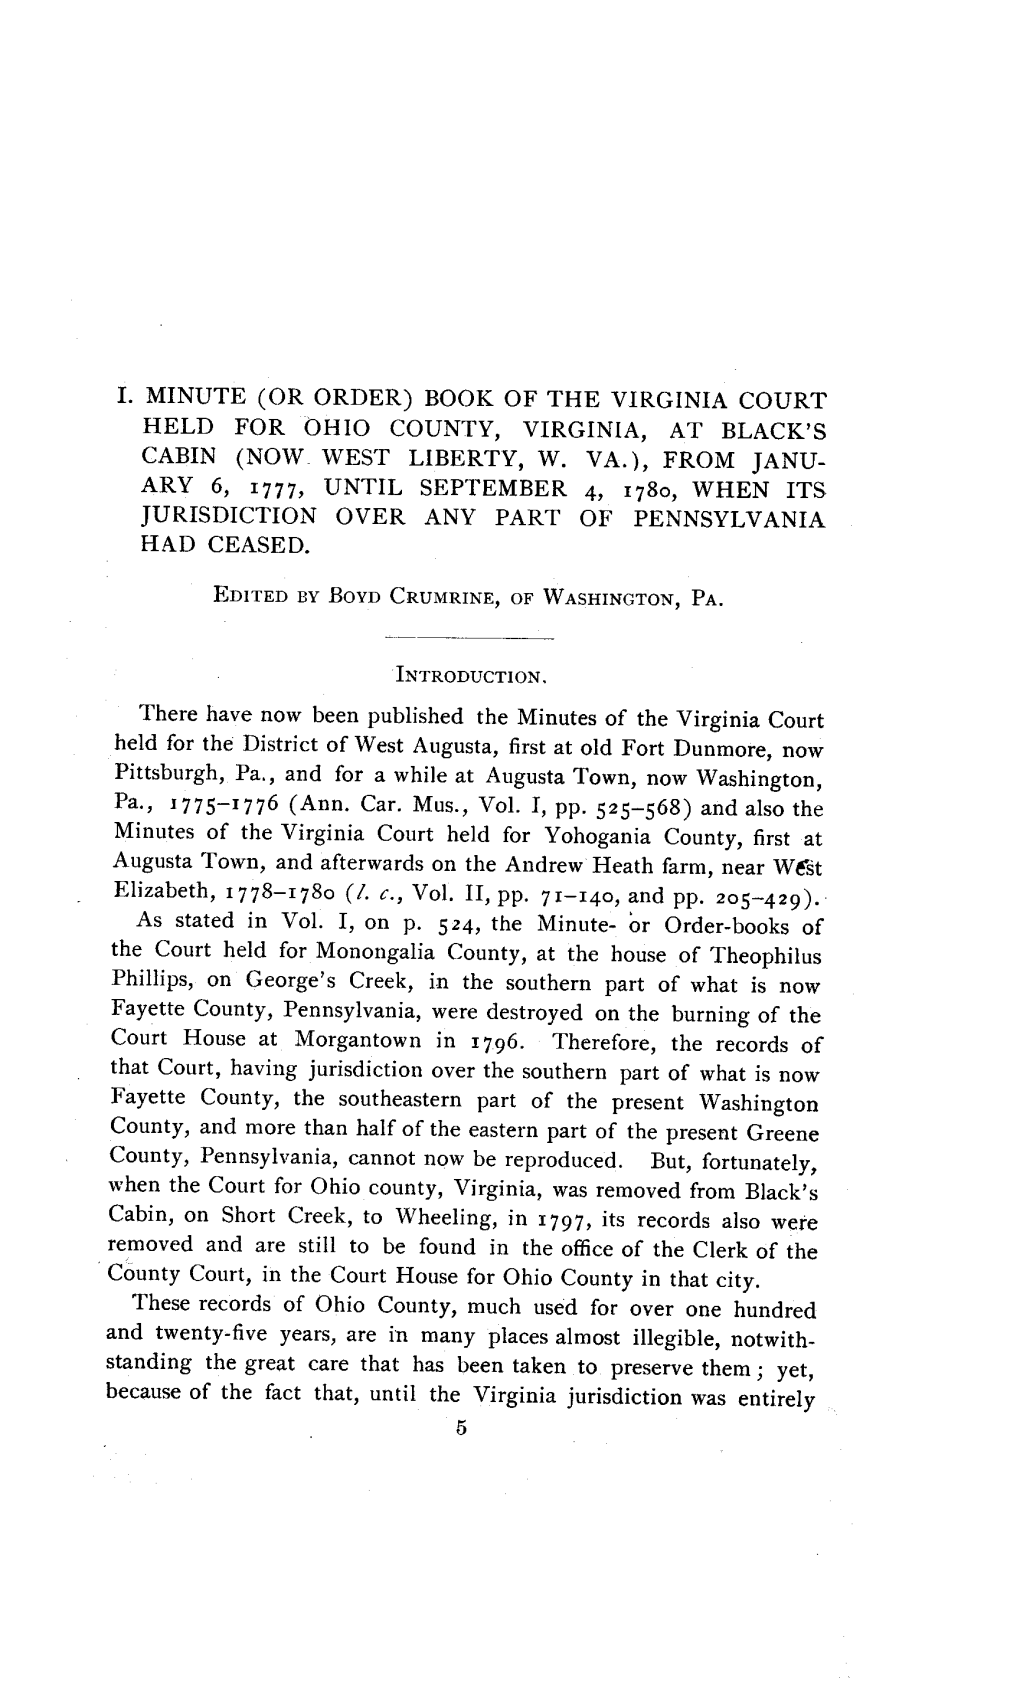 Book of the Virginia Court Held for Ohio County, Virginia, at Black's Cabin (Now West Liberty, W